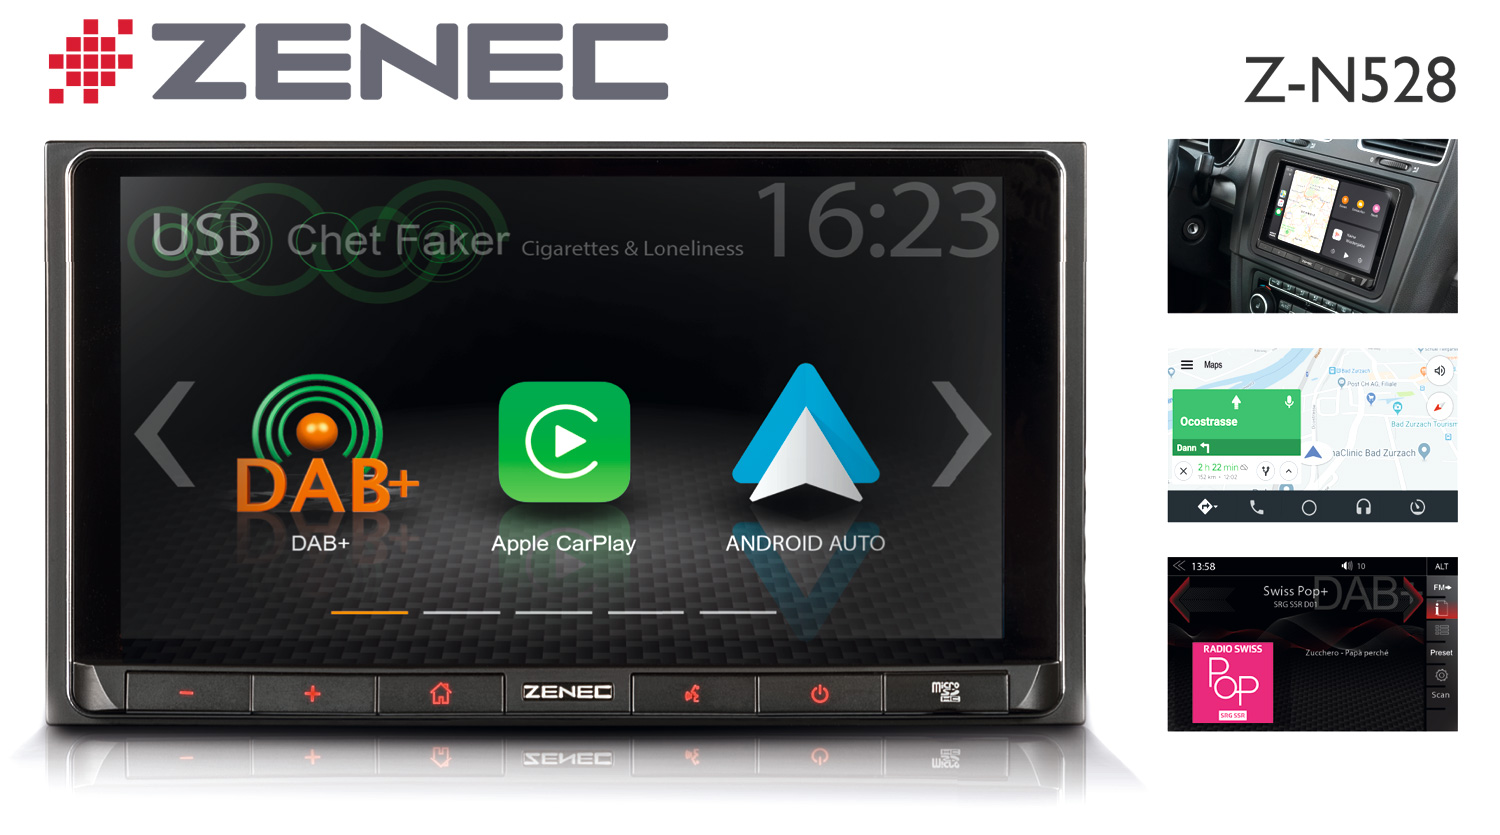 Mobile Lifestyle for the Car: The ZENEC Infotainer Z-N528